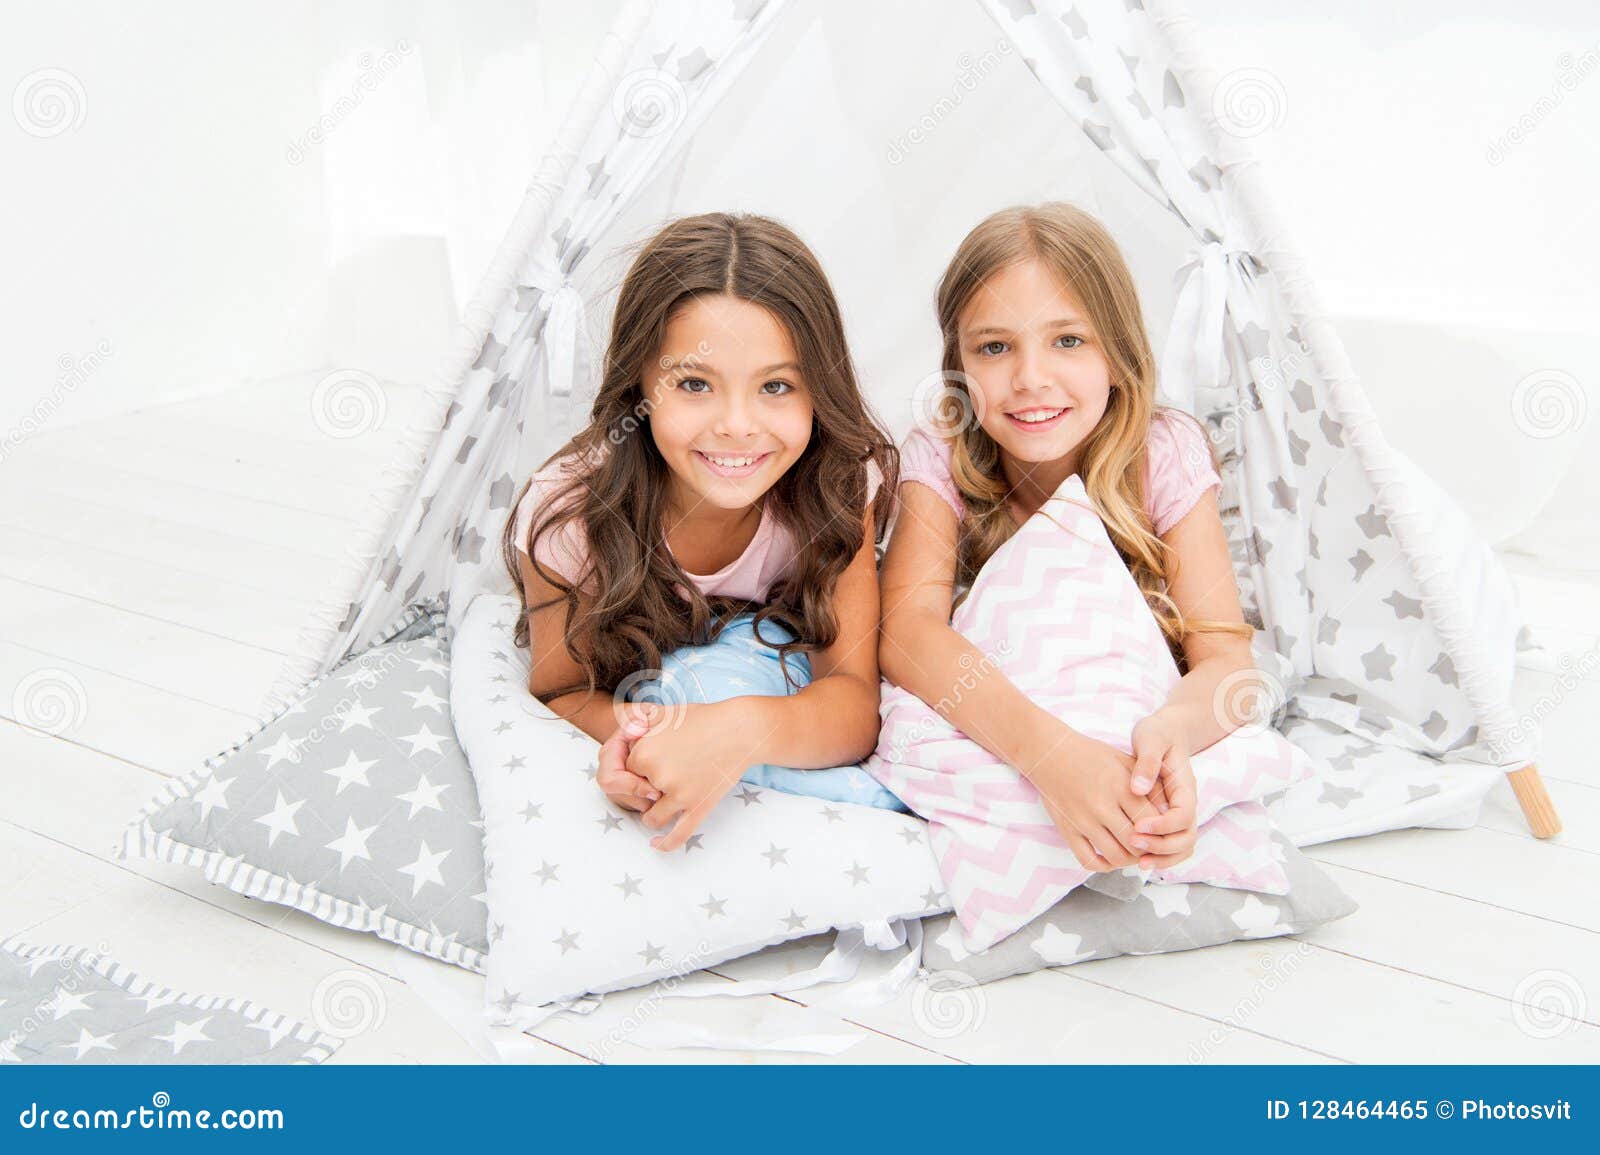 sisters or best friends spend time together lay in tipi house. girls having fun tipi house. girlish leisure. sisters